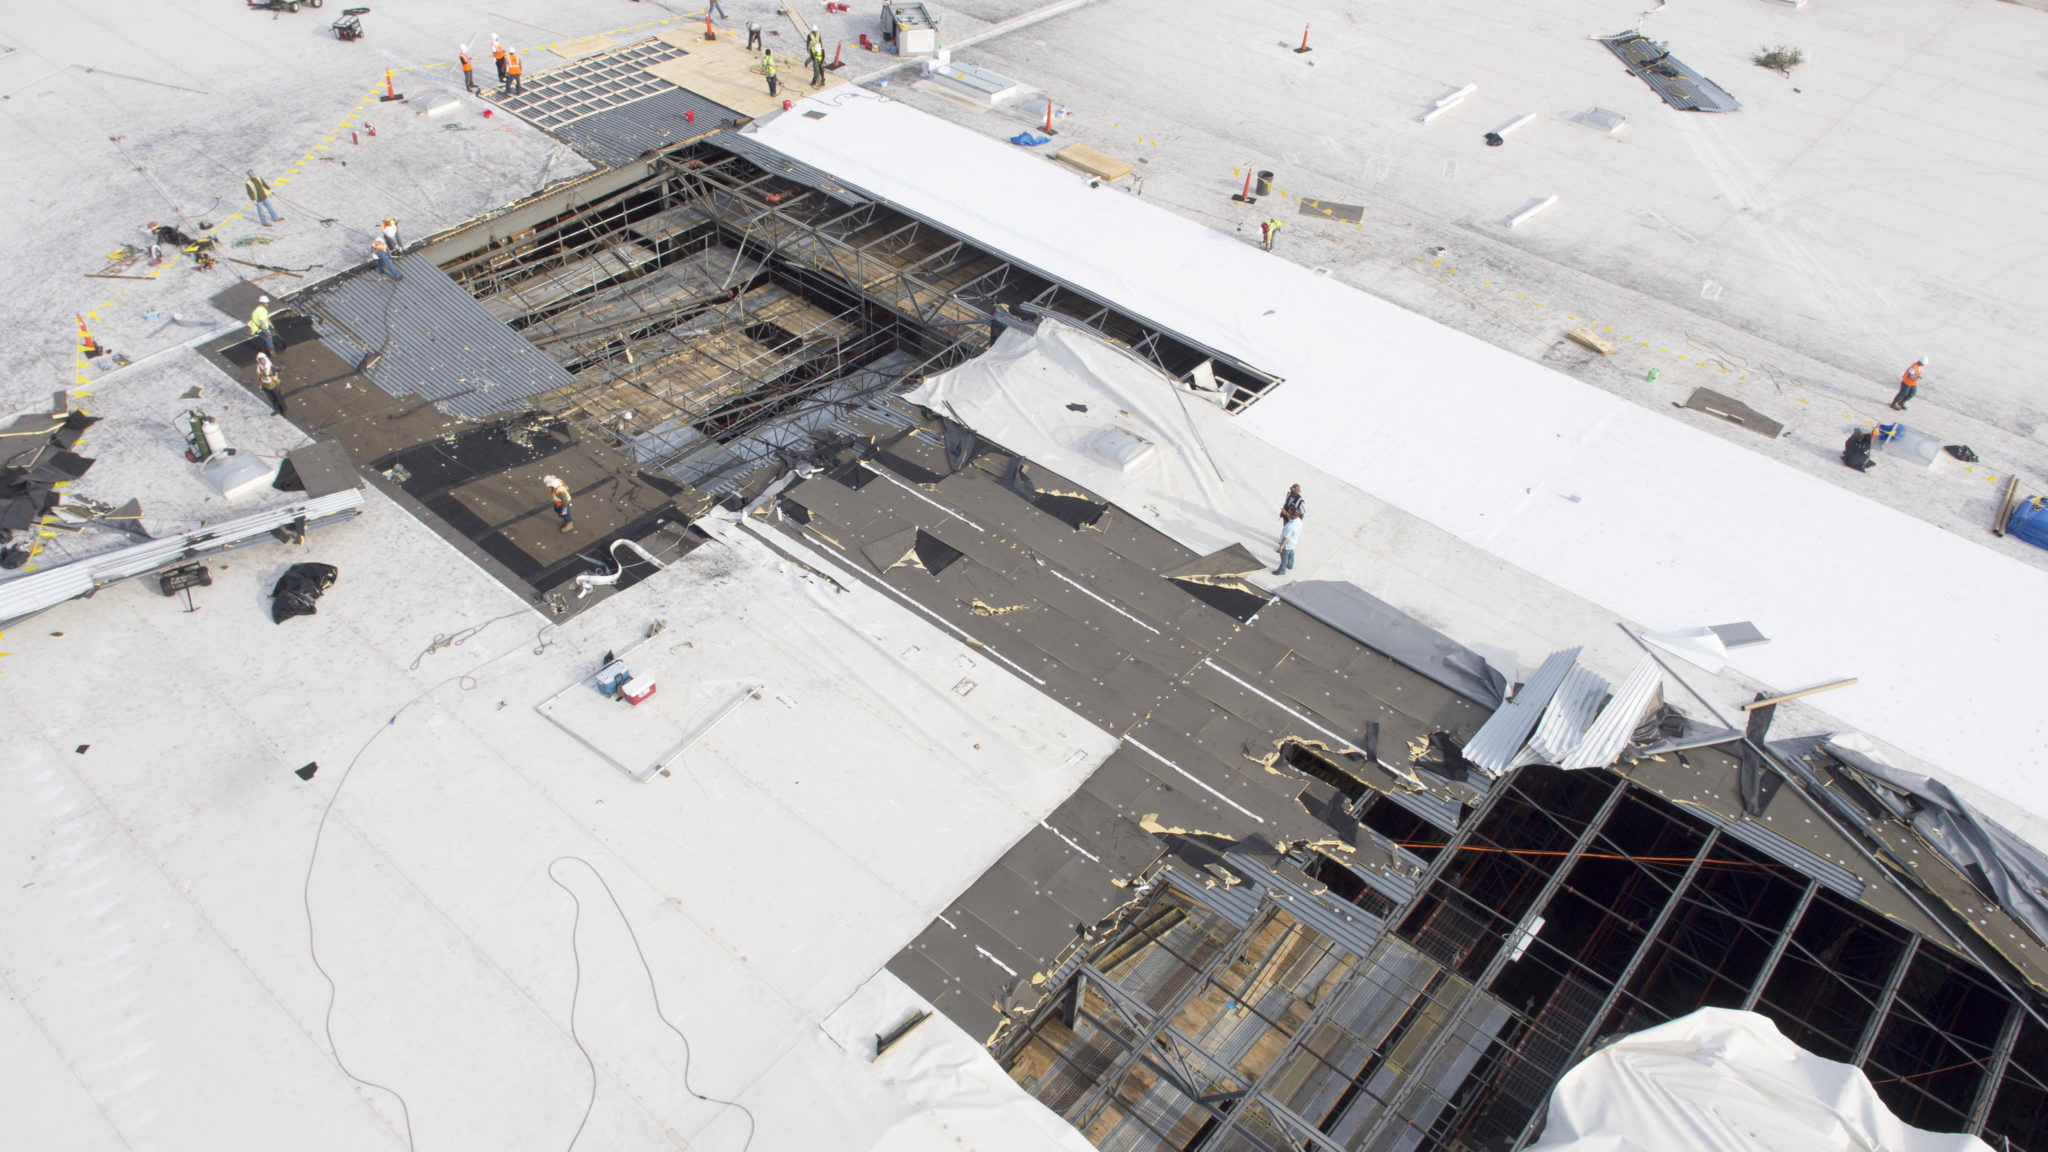 Aerial photography can help assess roof damage or document needed repairs